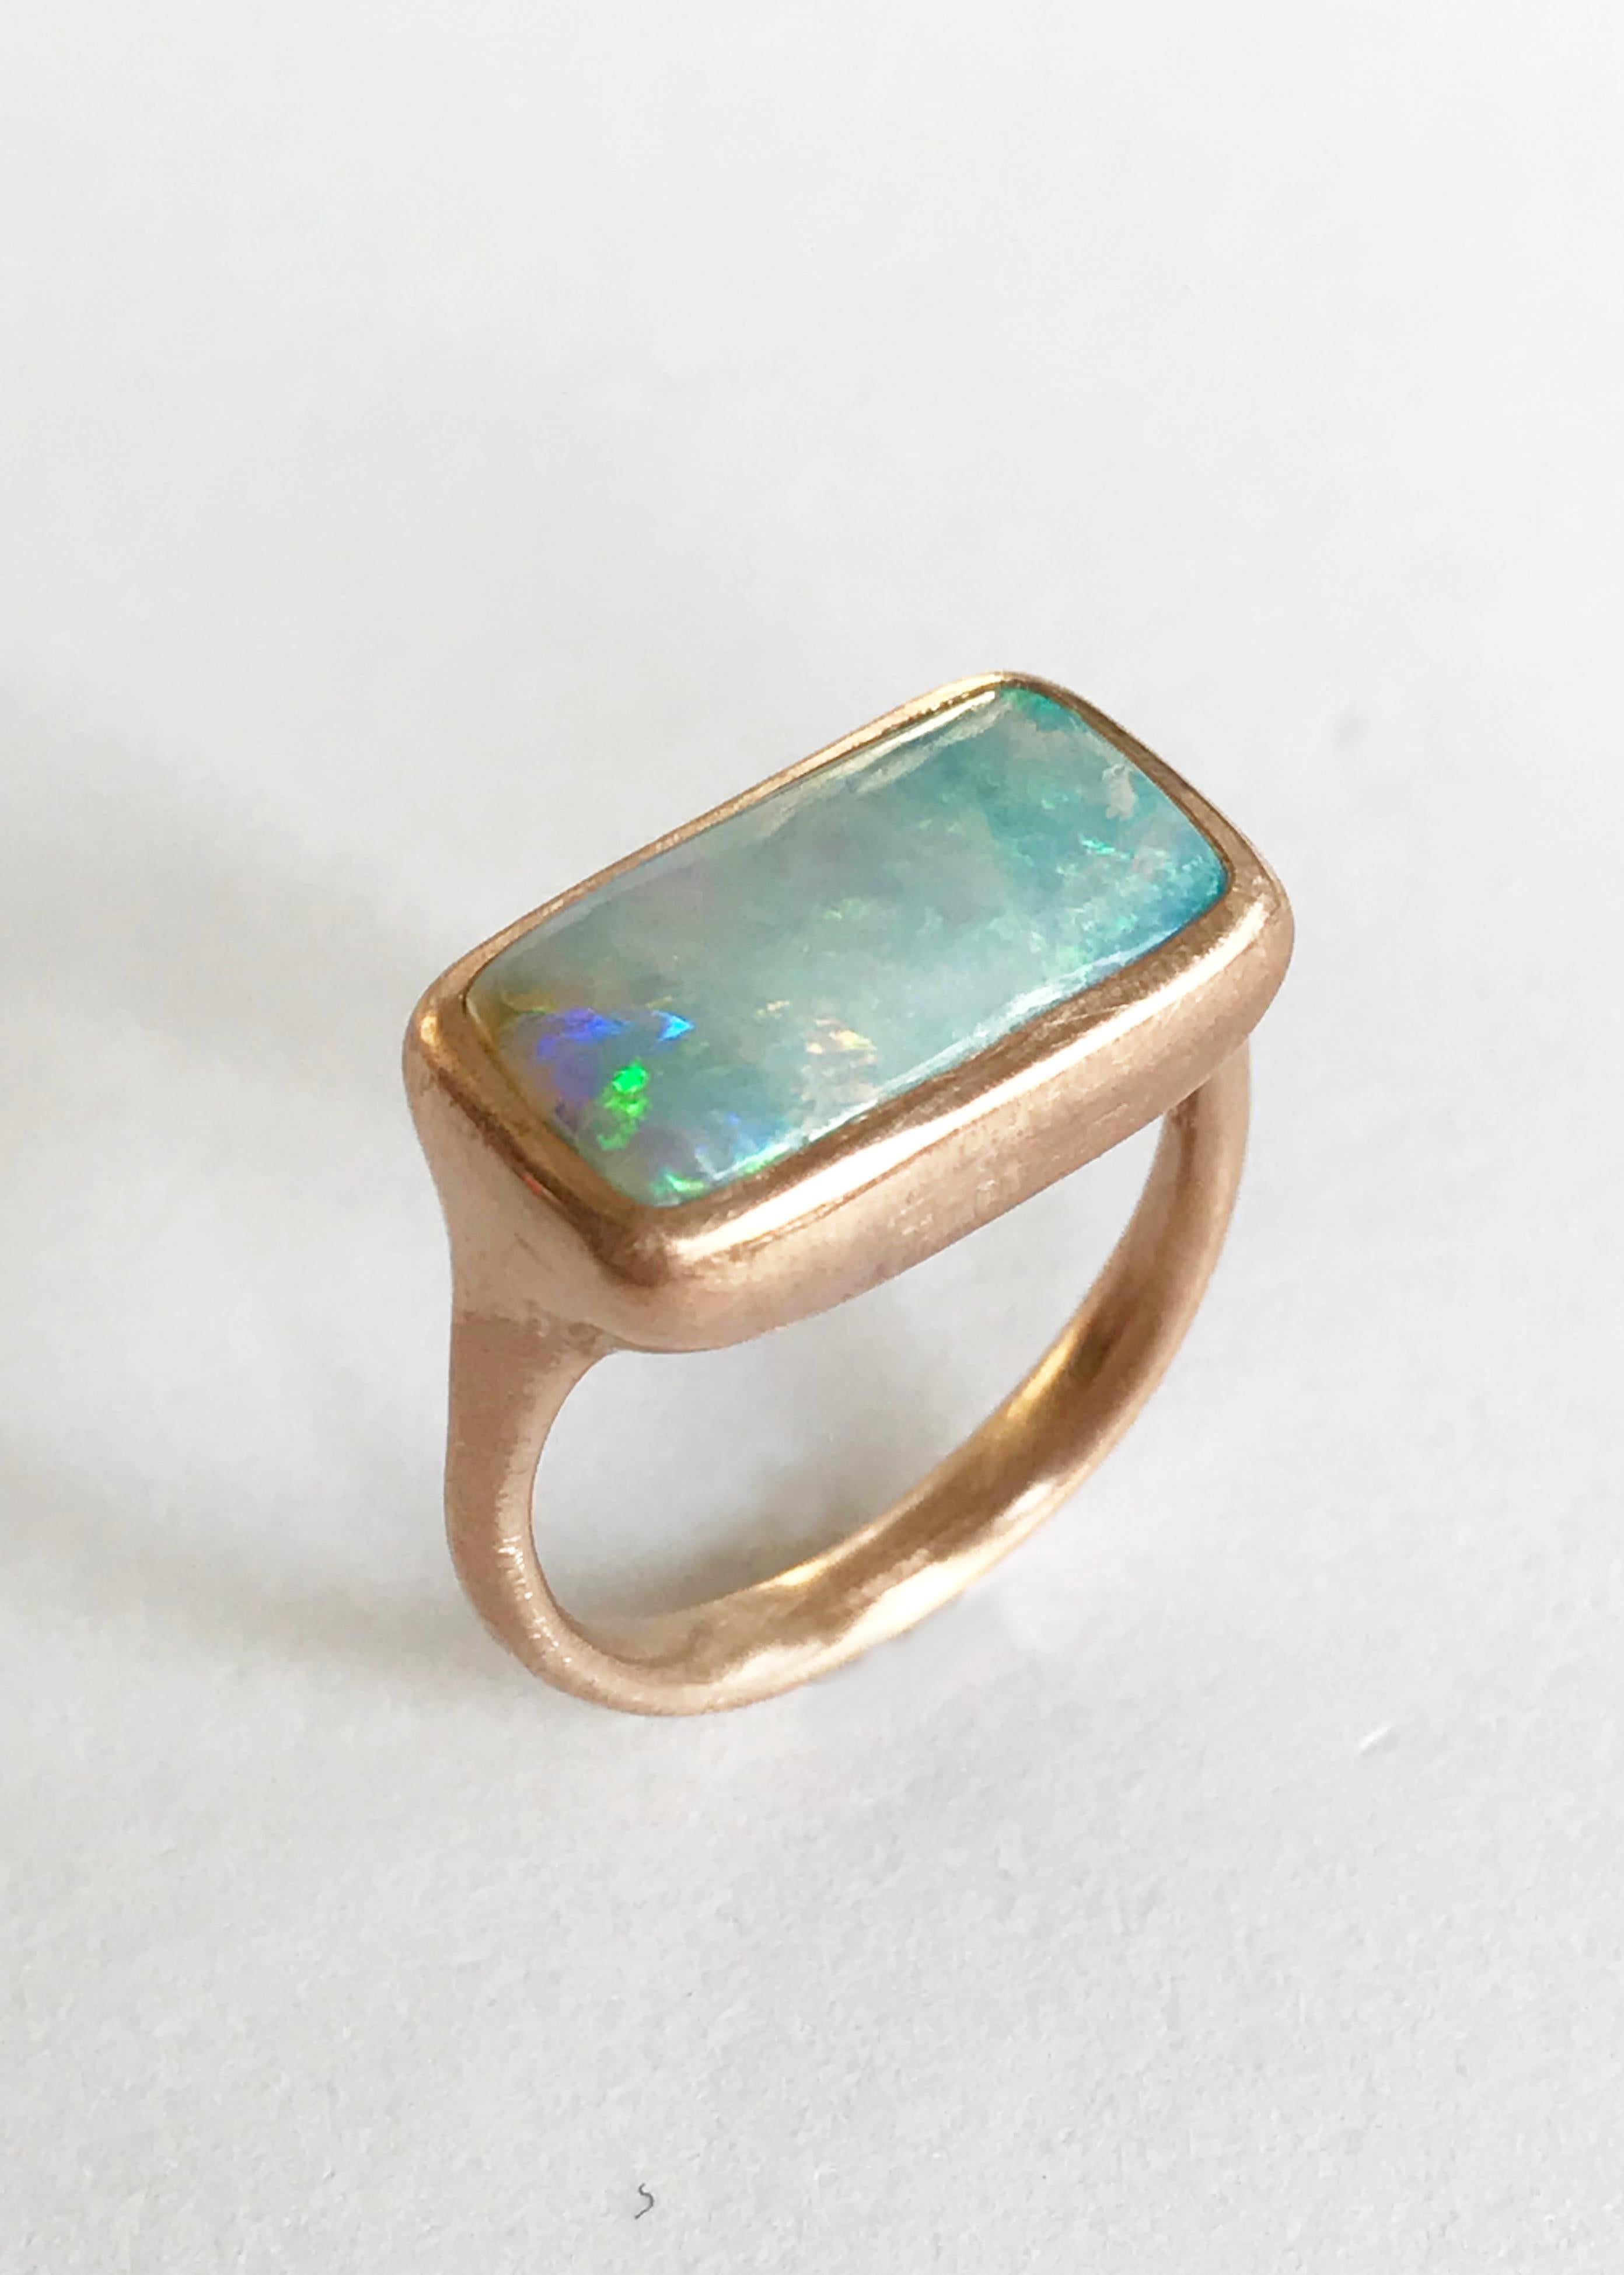 Dalben design One of a kind 18 kt rose gold matte finishing ring with a 4,05 carat bezel-set rectangular Australian Boulder Opal .  
The stone has light blue pastel colors with green light spots.
Ring size 6 1/4 - EU 52 re-sizable to most finger